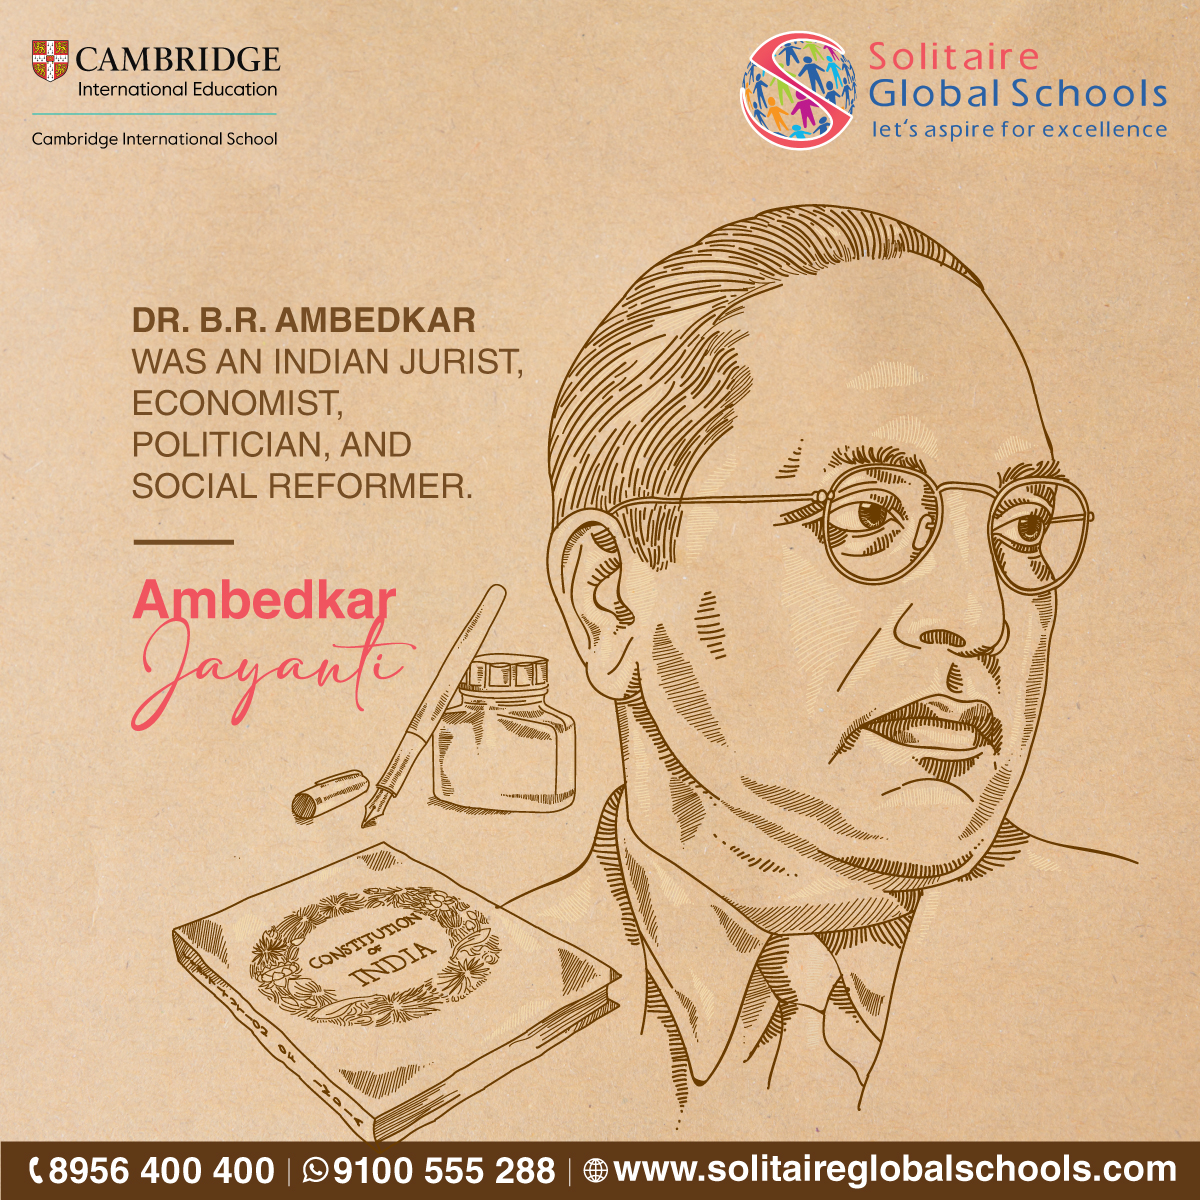 Celebrating the extraordinary legacy of Dr. B.R. Ambedkar on his Jayanti! His vision for equality and justice continues to inspire us all. #AmbedkarJayanti #solitaireglobalschools #bestschoolinhyderbad #bestschoolnearme #InternationalSchools #bestschools2023 #cambridgecurriculum